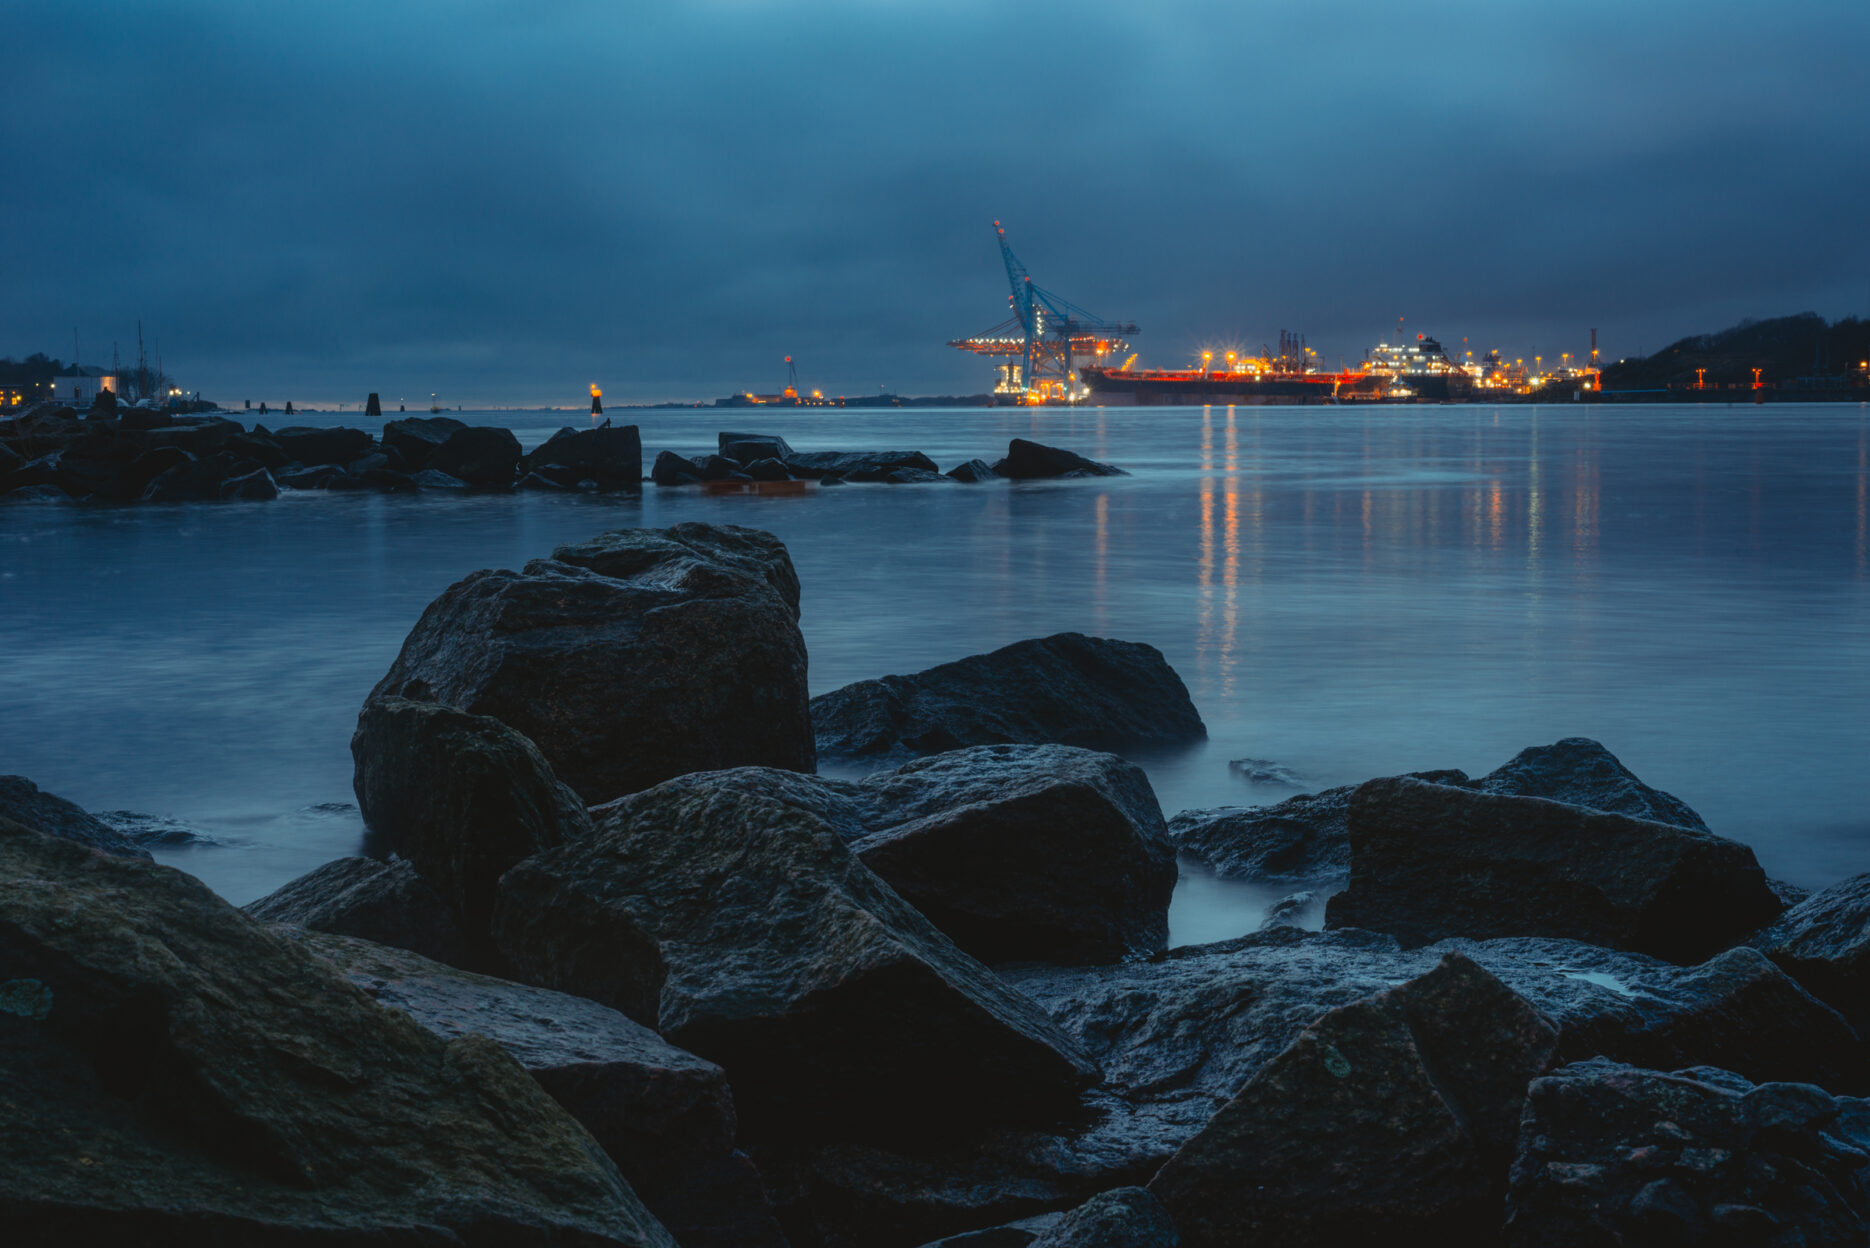 Stones at a coastline. Industrial cranes in the background.